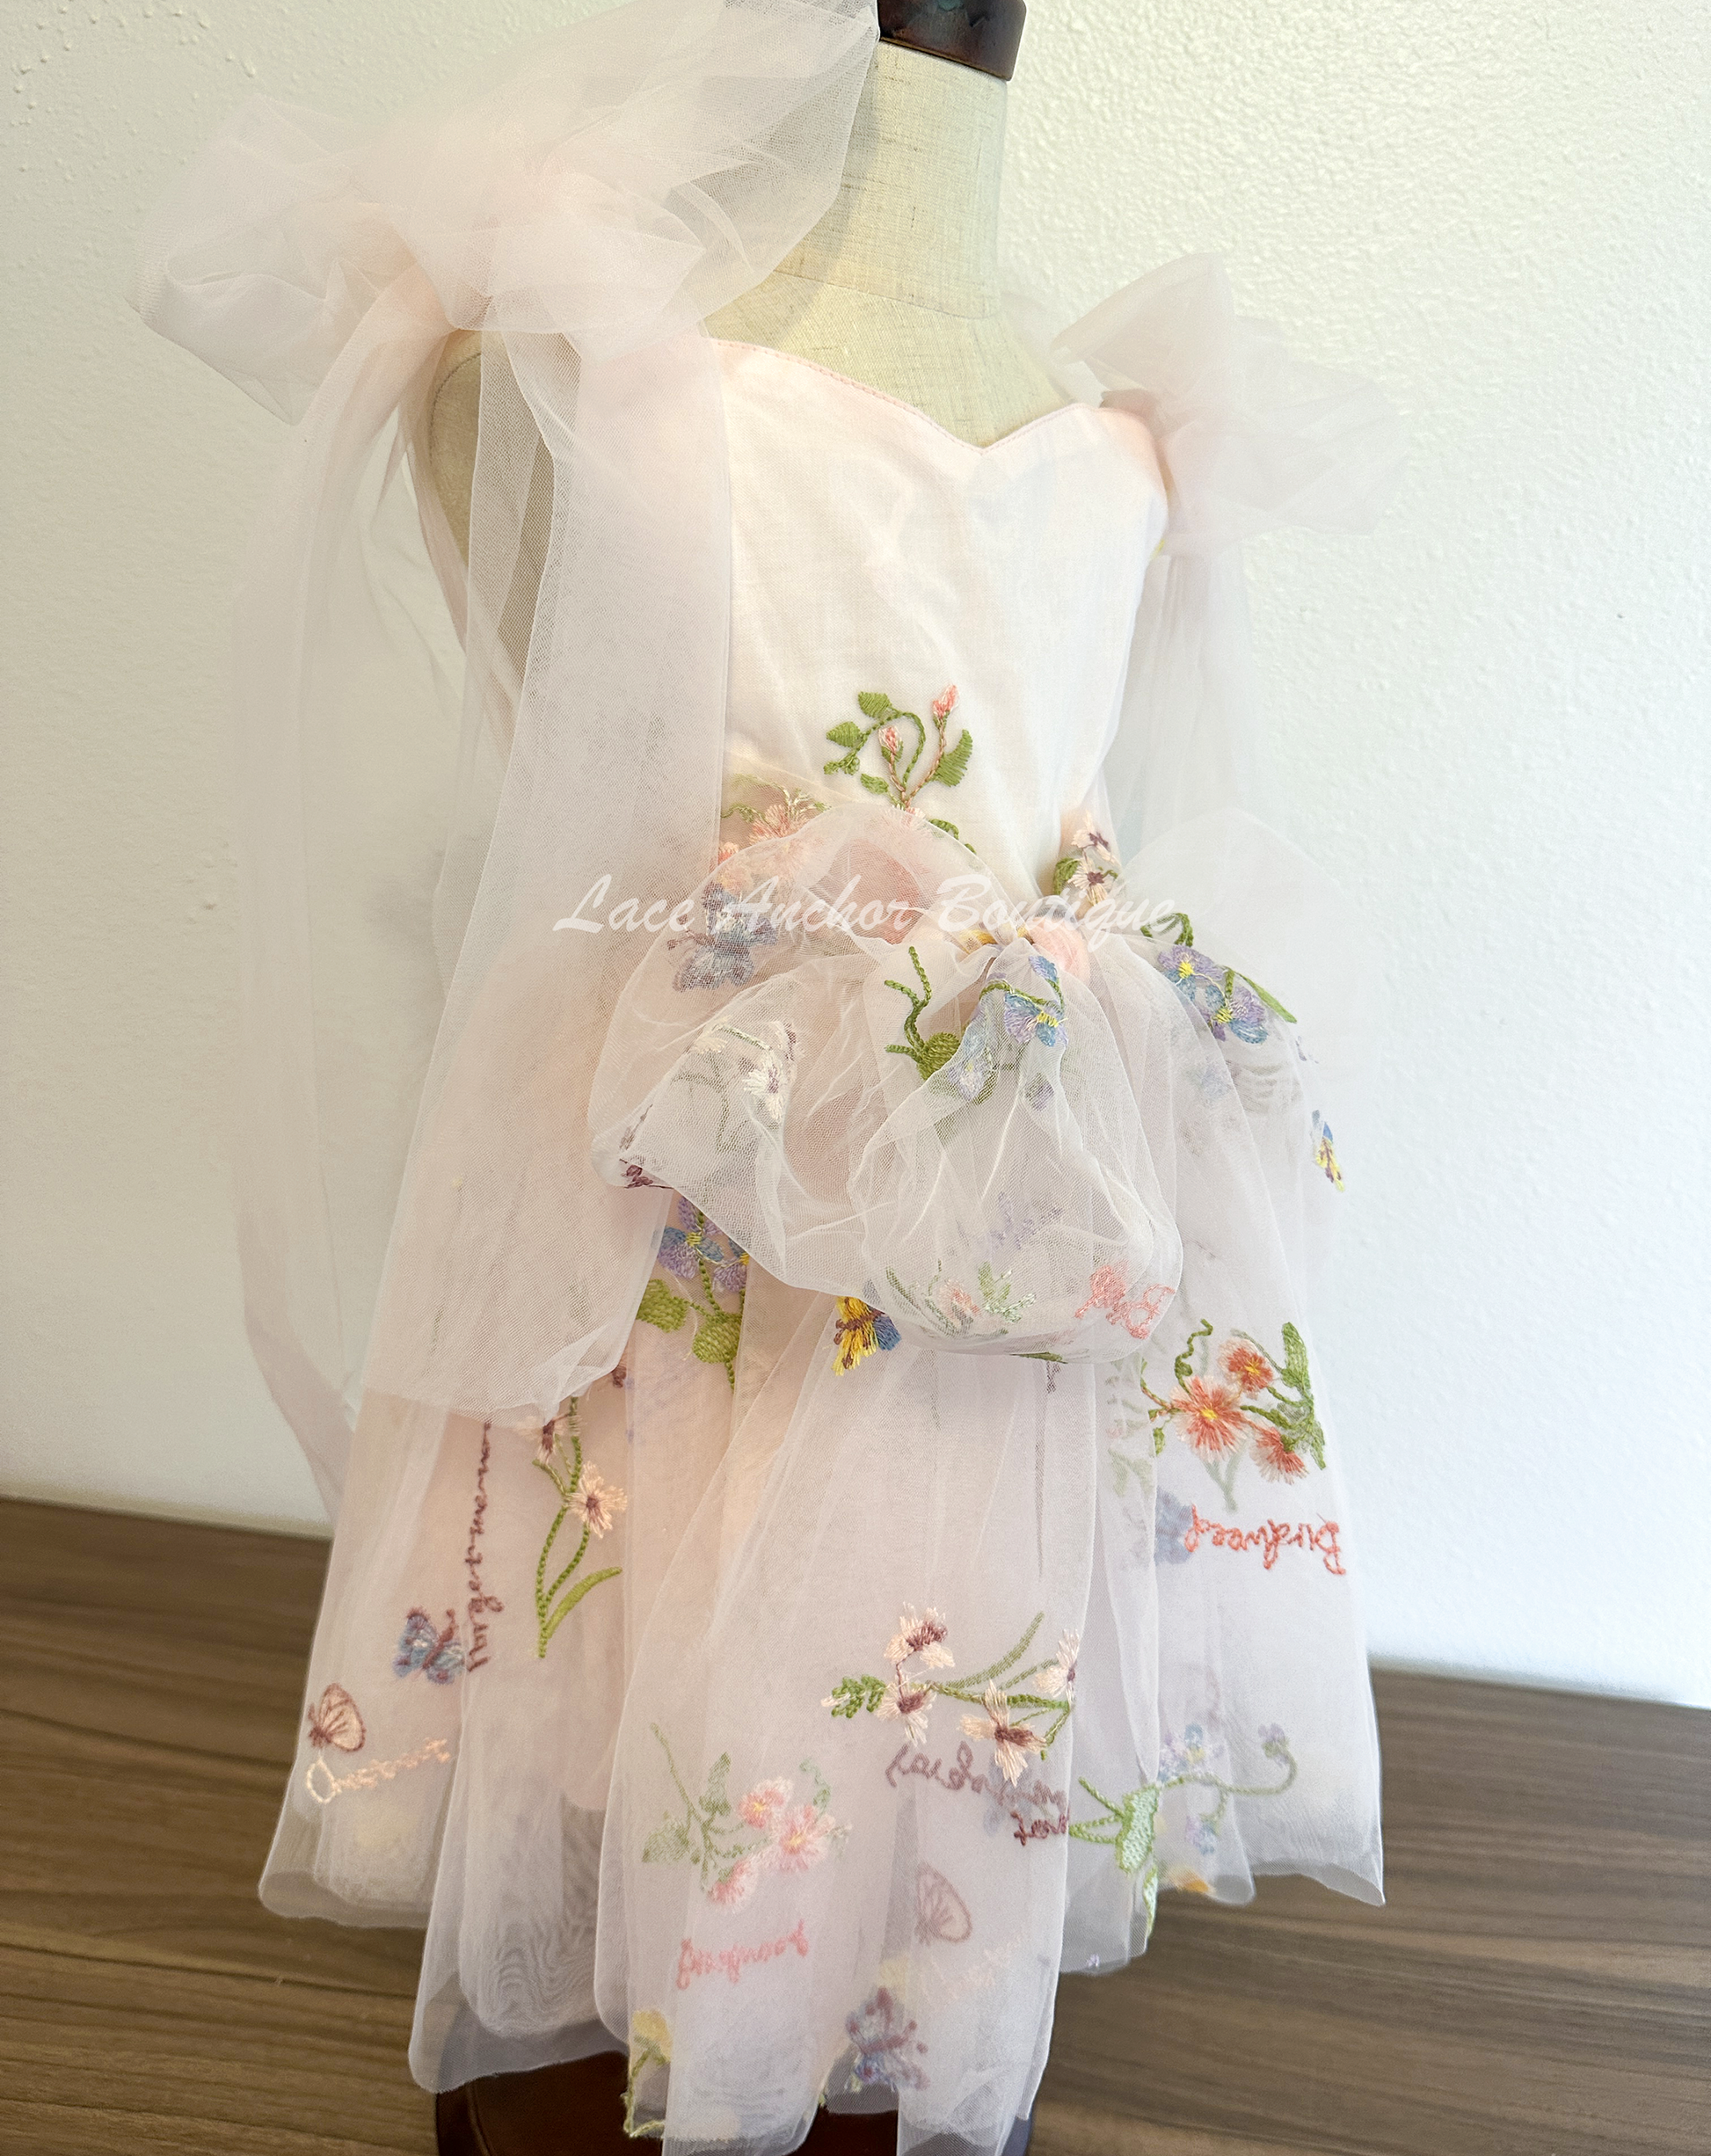 toddler youth puffy tied shoulder flower girl dress with large tied bow tied at waist. Outfits in light blush pink with emboridered floral print.